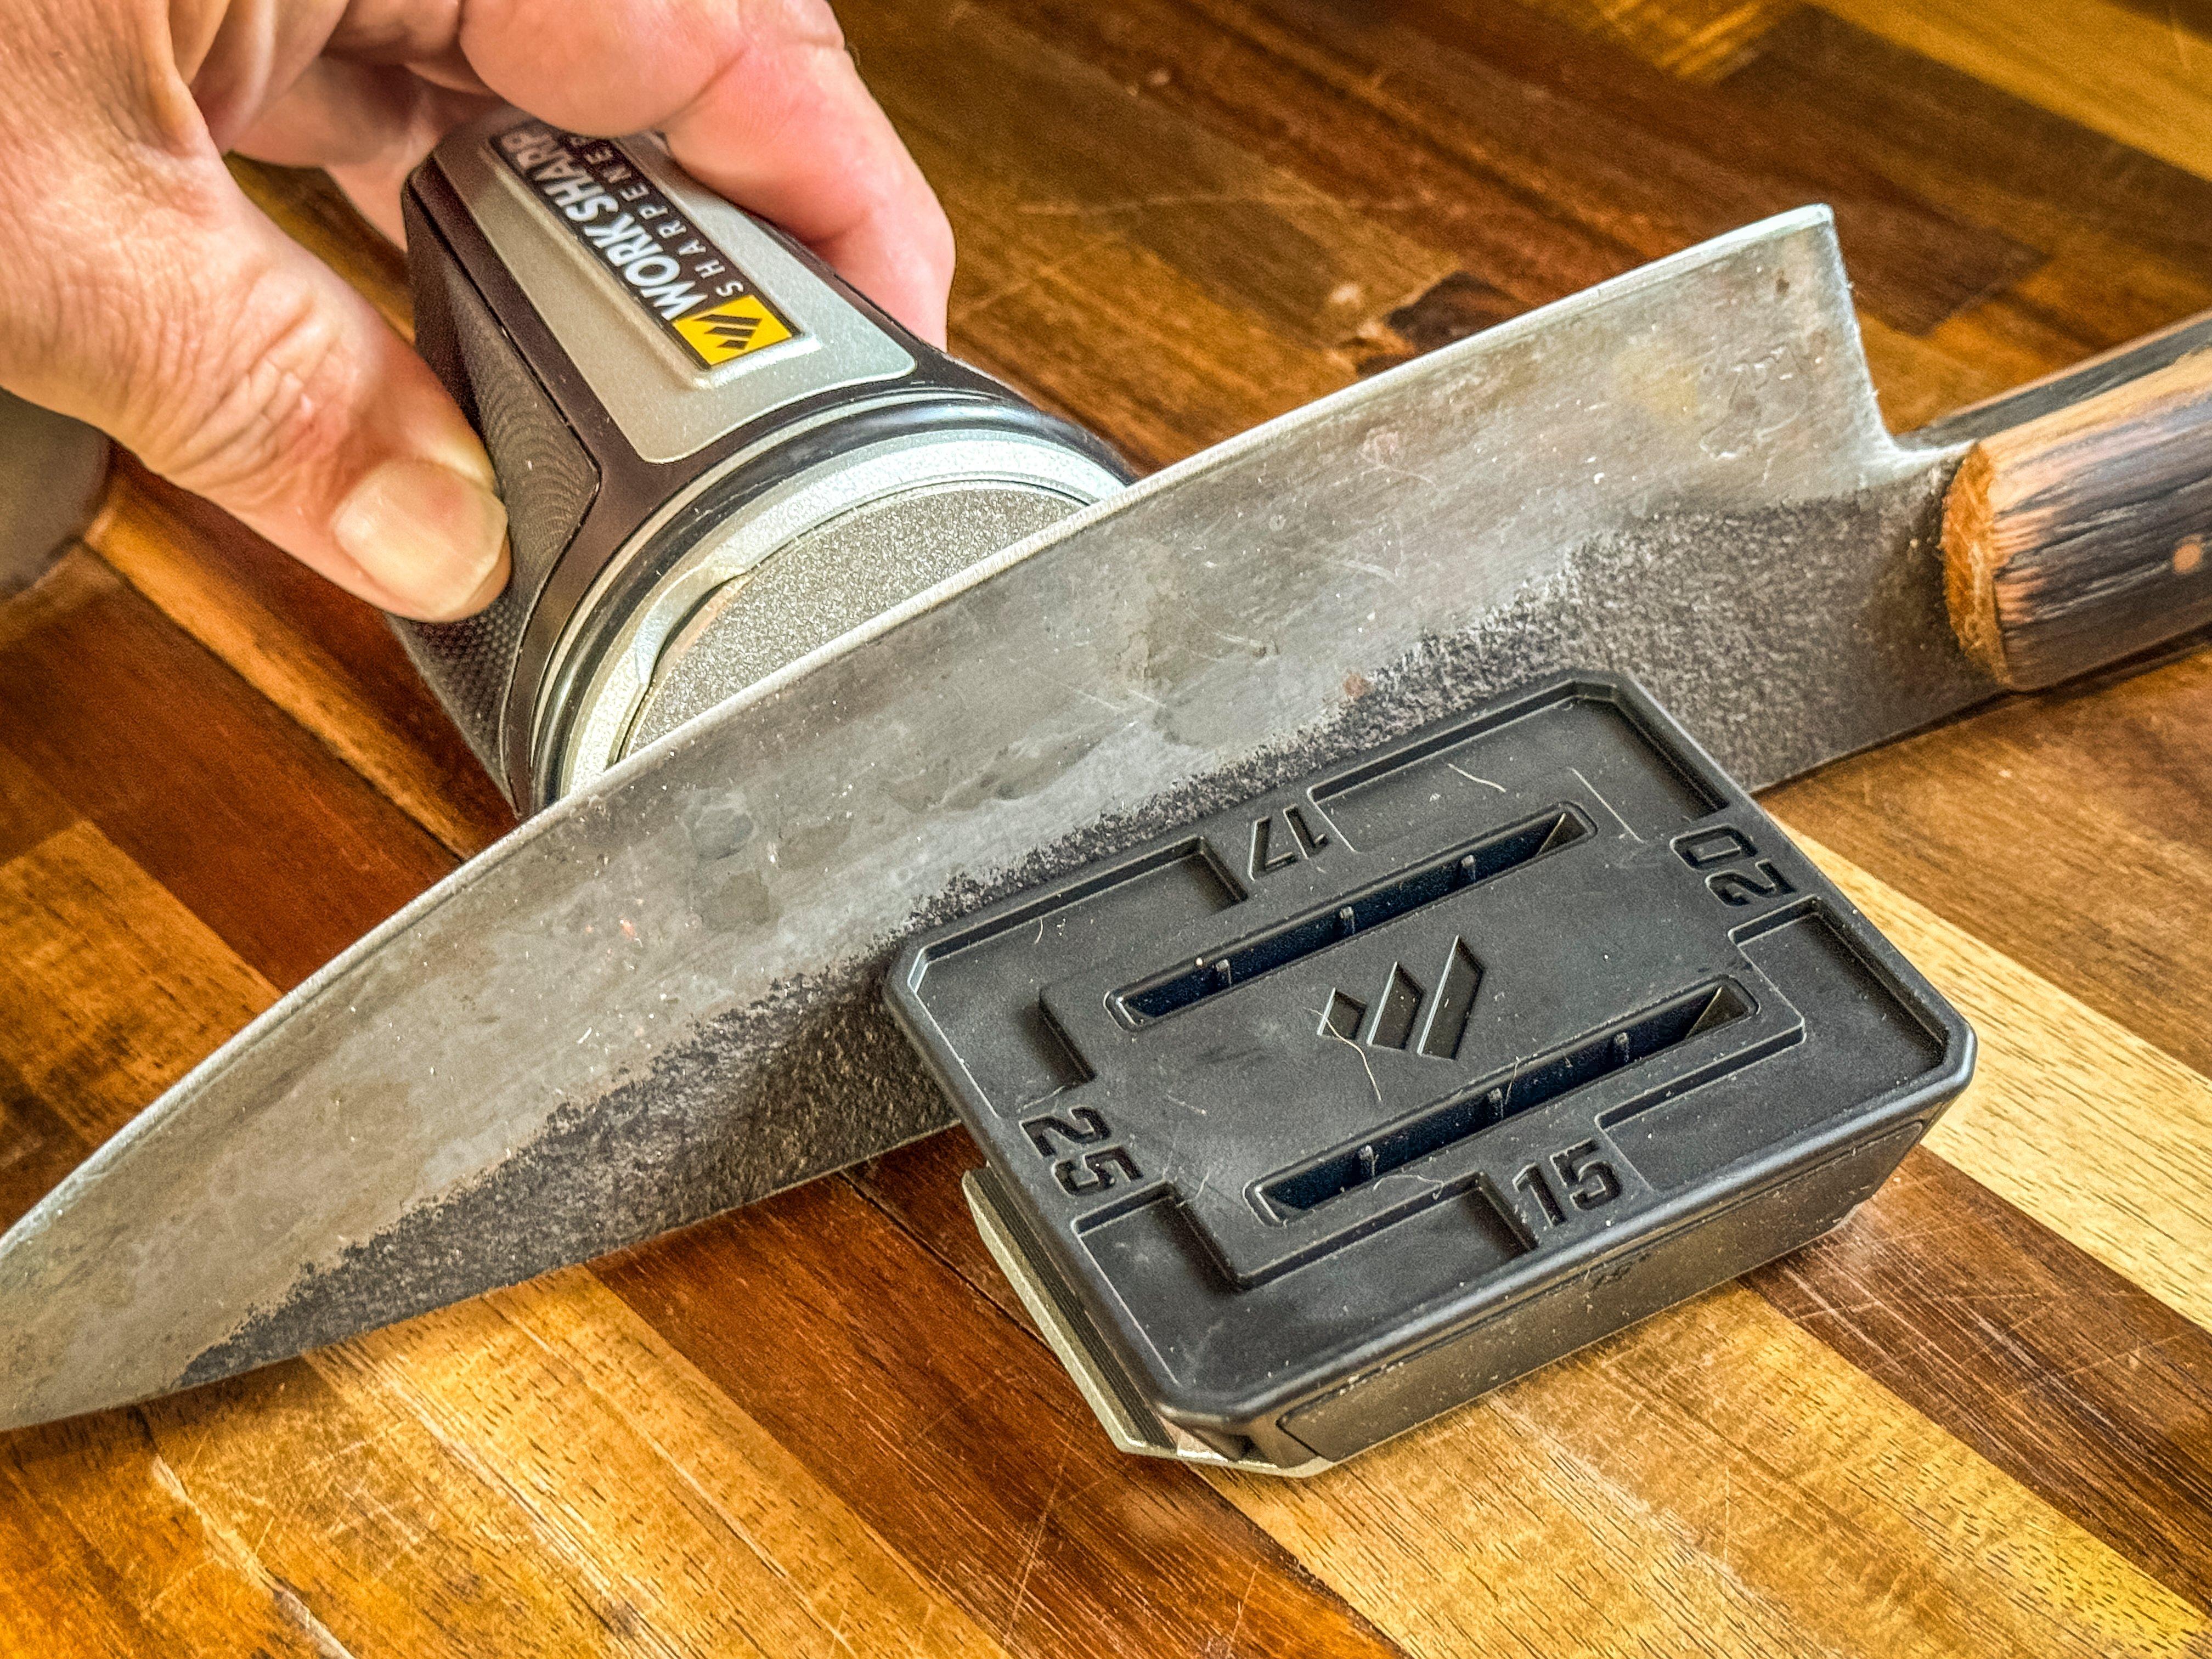 Sharpening Instructions, Knives need sharpening? You can sharpen your  straight-edge knives at home like a pro with Cutco's knife sharpener and  these step-by-step instructions. 🔪, By Cutco Cutlery